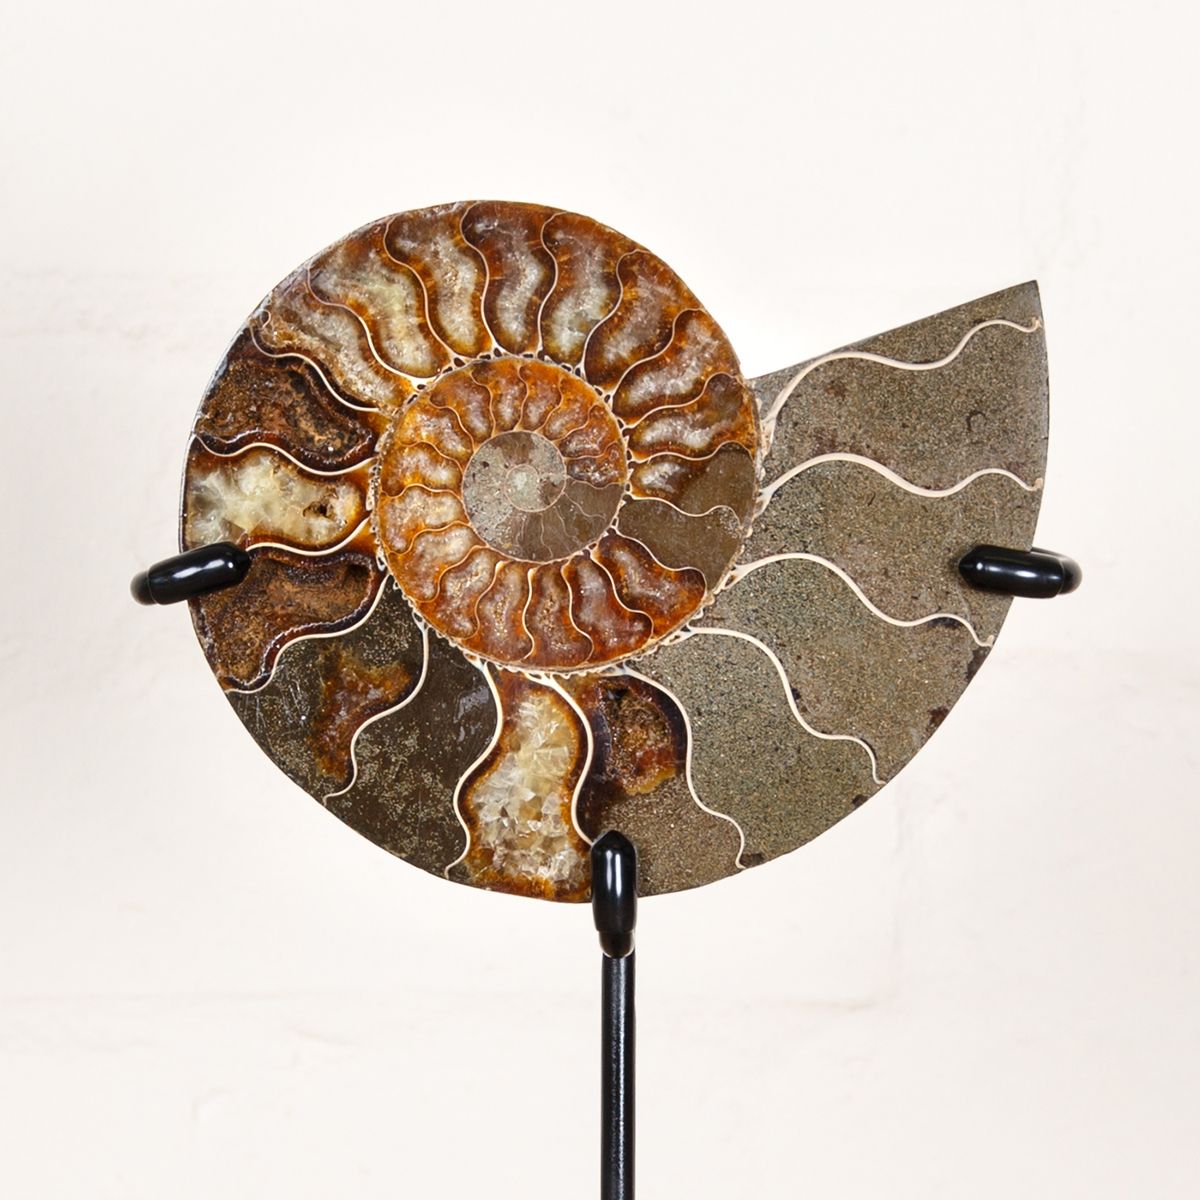 6 inch Polished & Sliced Ammonite Fossil on Stand (Cleoniceras sp)